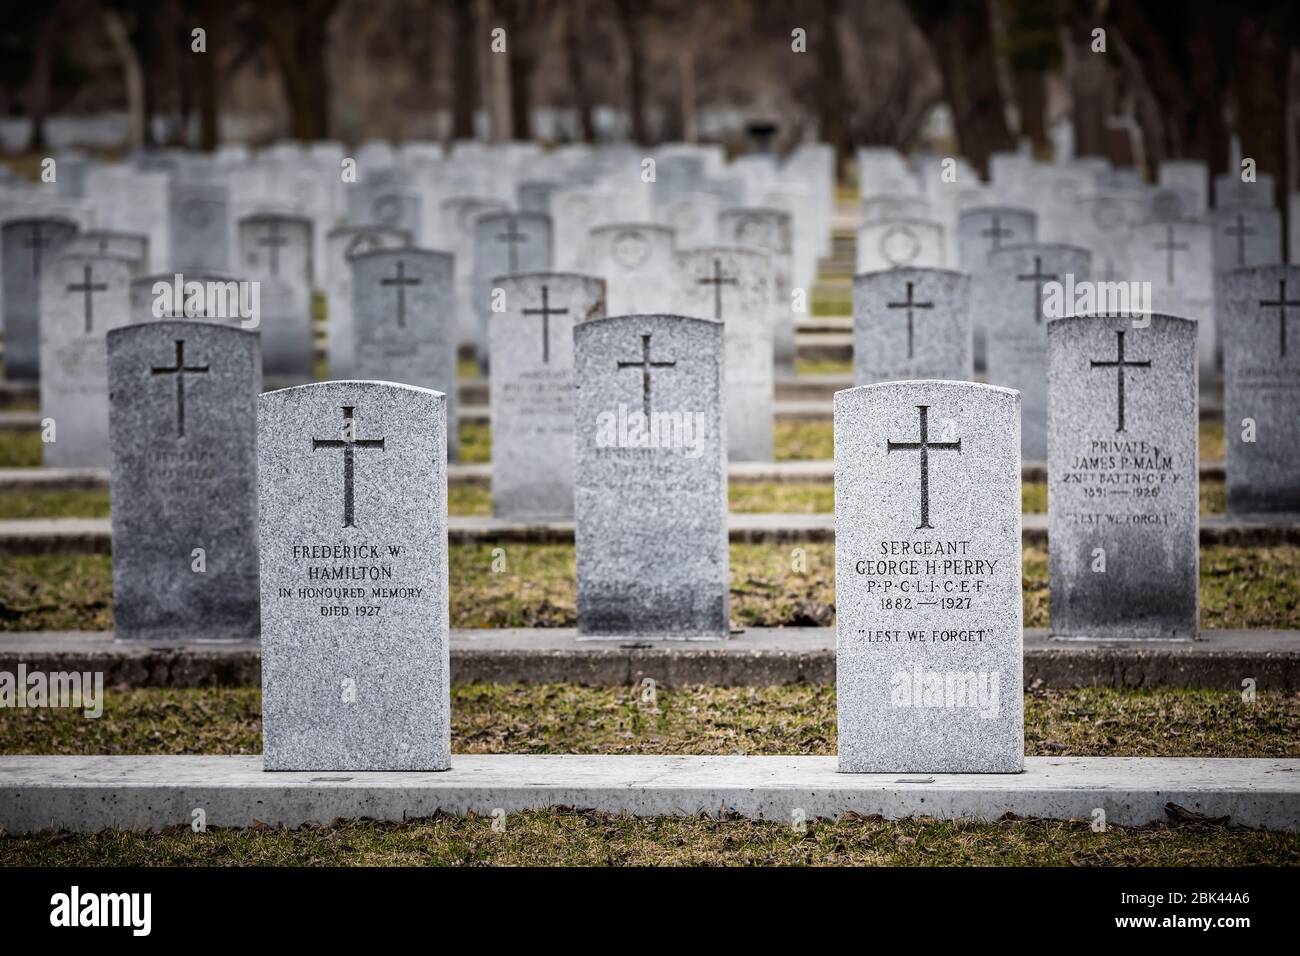 Military headstones in The Field of Honour, Brookside Cemetary, Winnipeg, Manitoba, Canada. Stock Photo